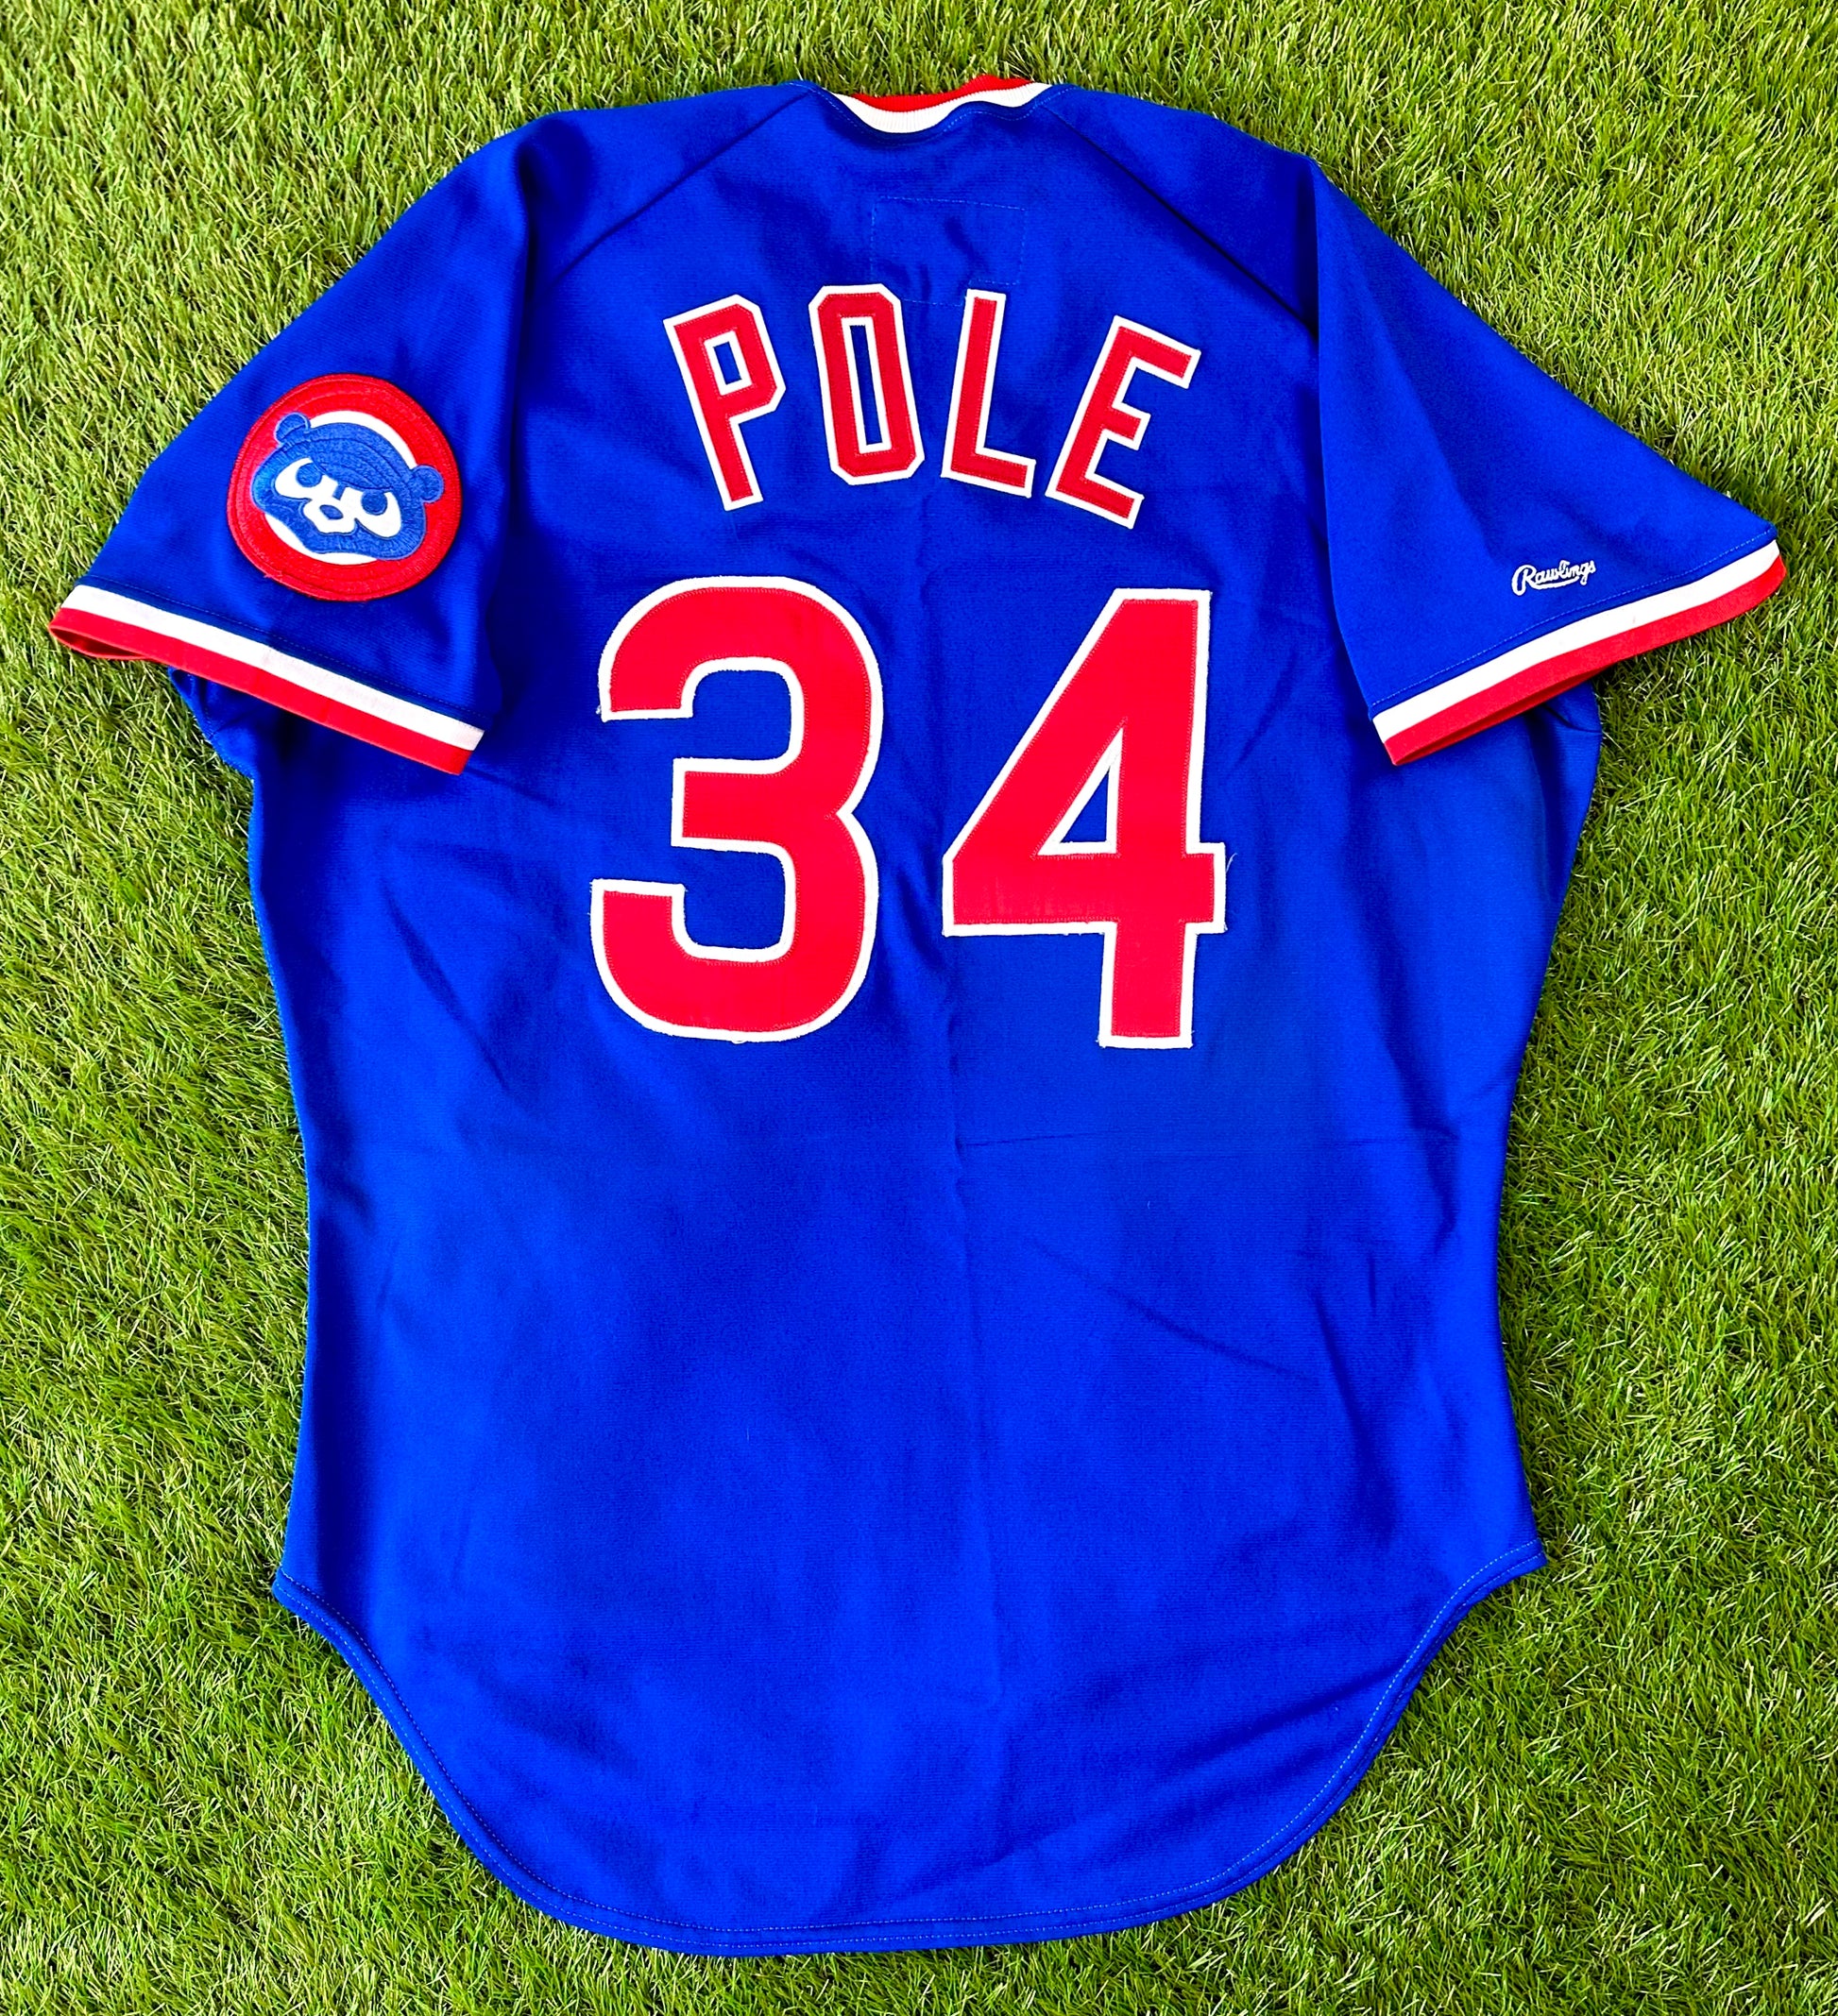 Chicago Cubs Dick Pole 1988 Game Worn MLB Baseball Jersey (46/Large)